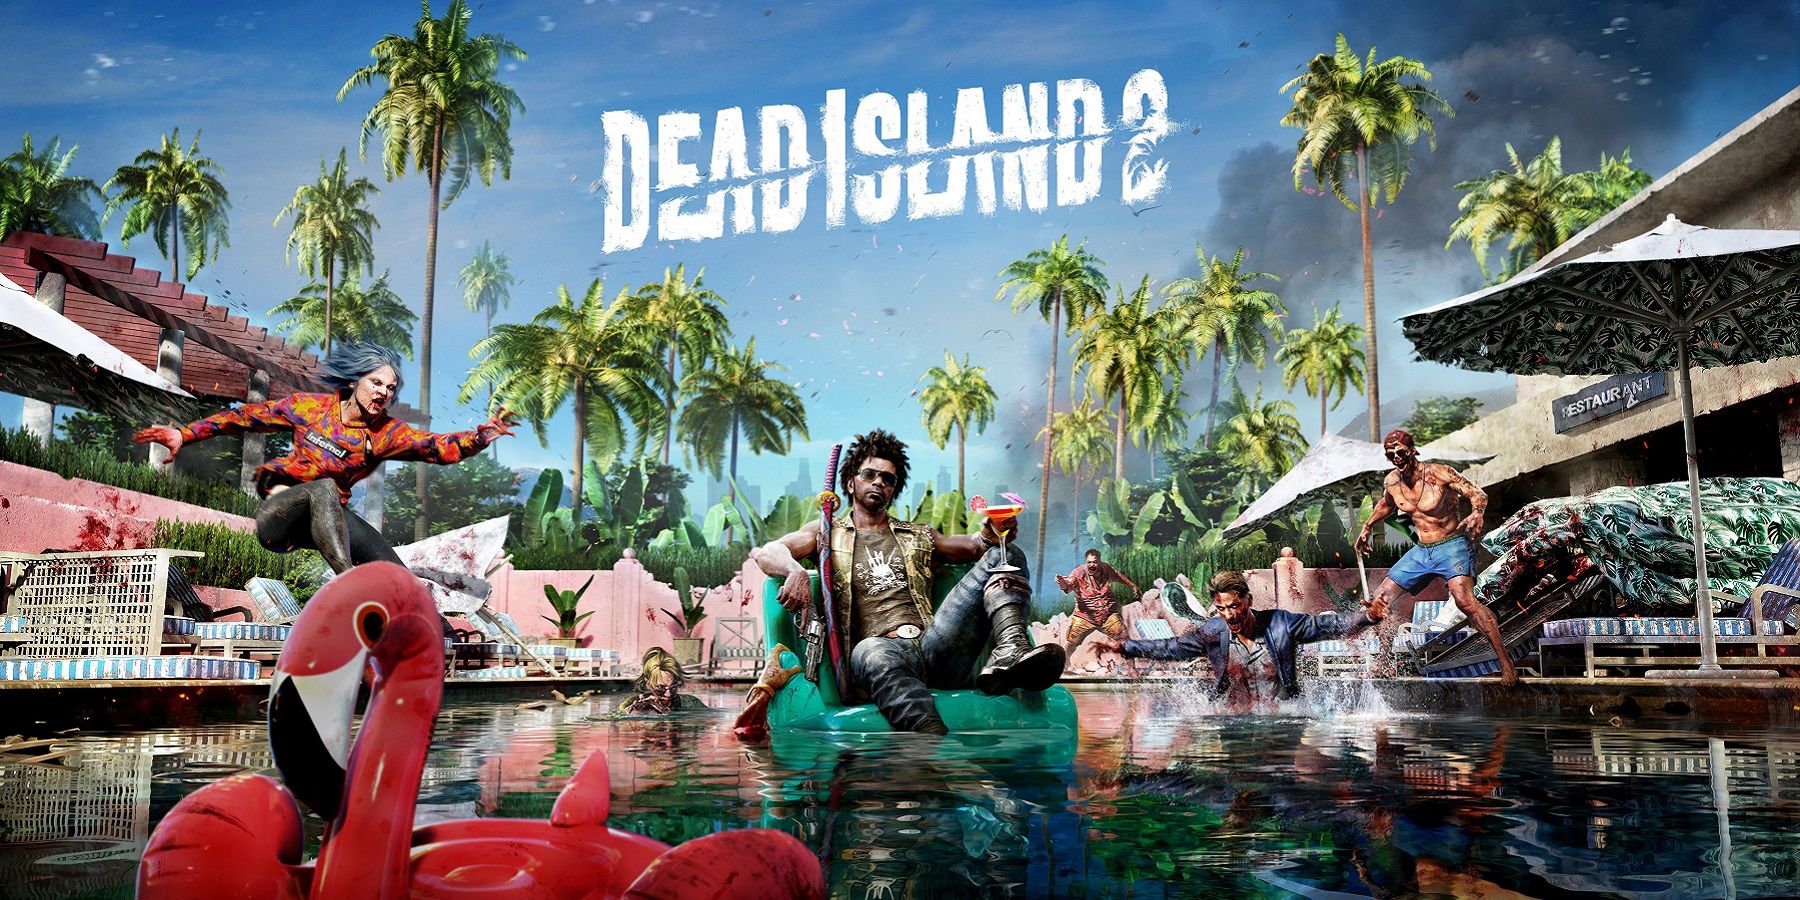 Image from Dead Island 2 showing Jacob chilling in a swimming pool while holding a drink.